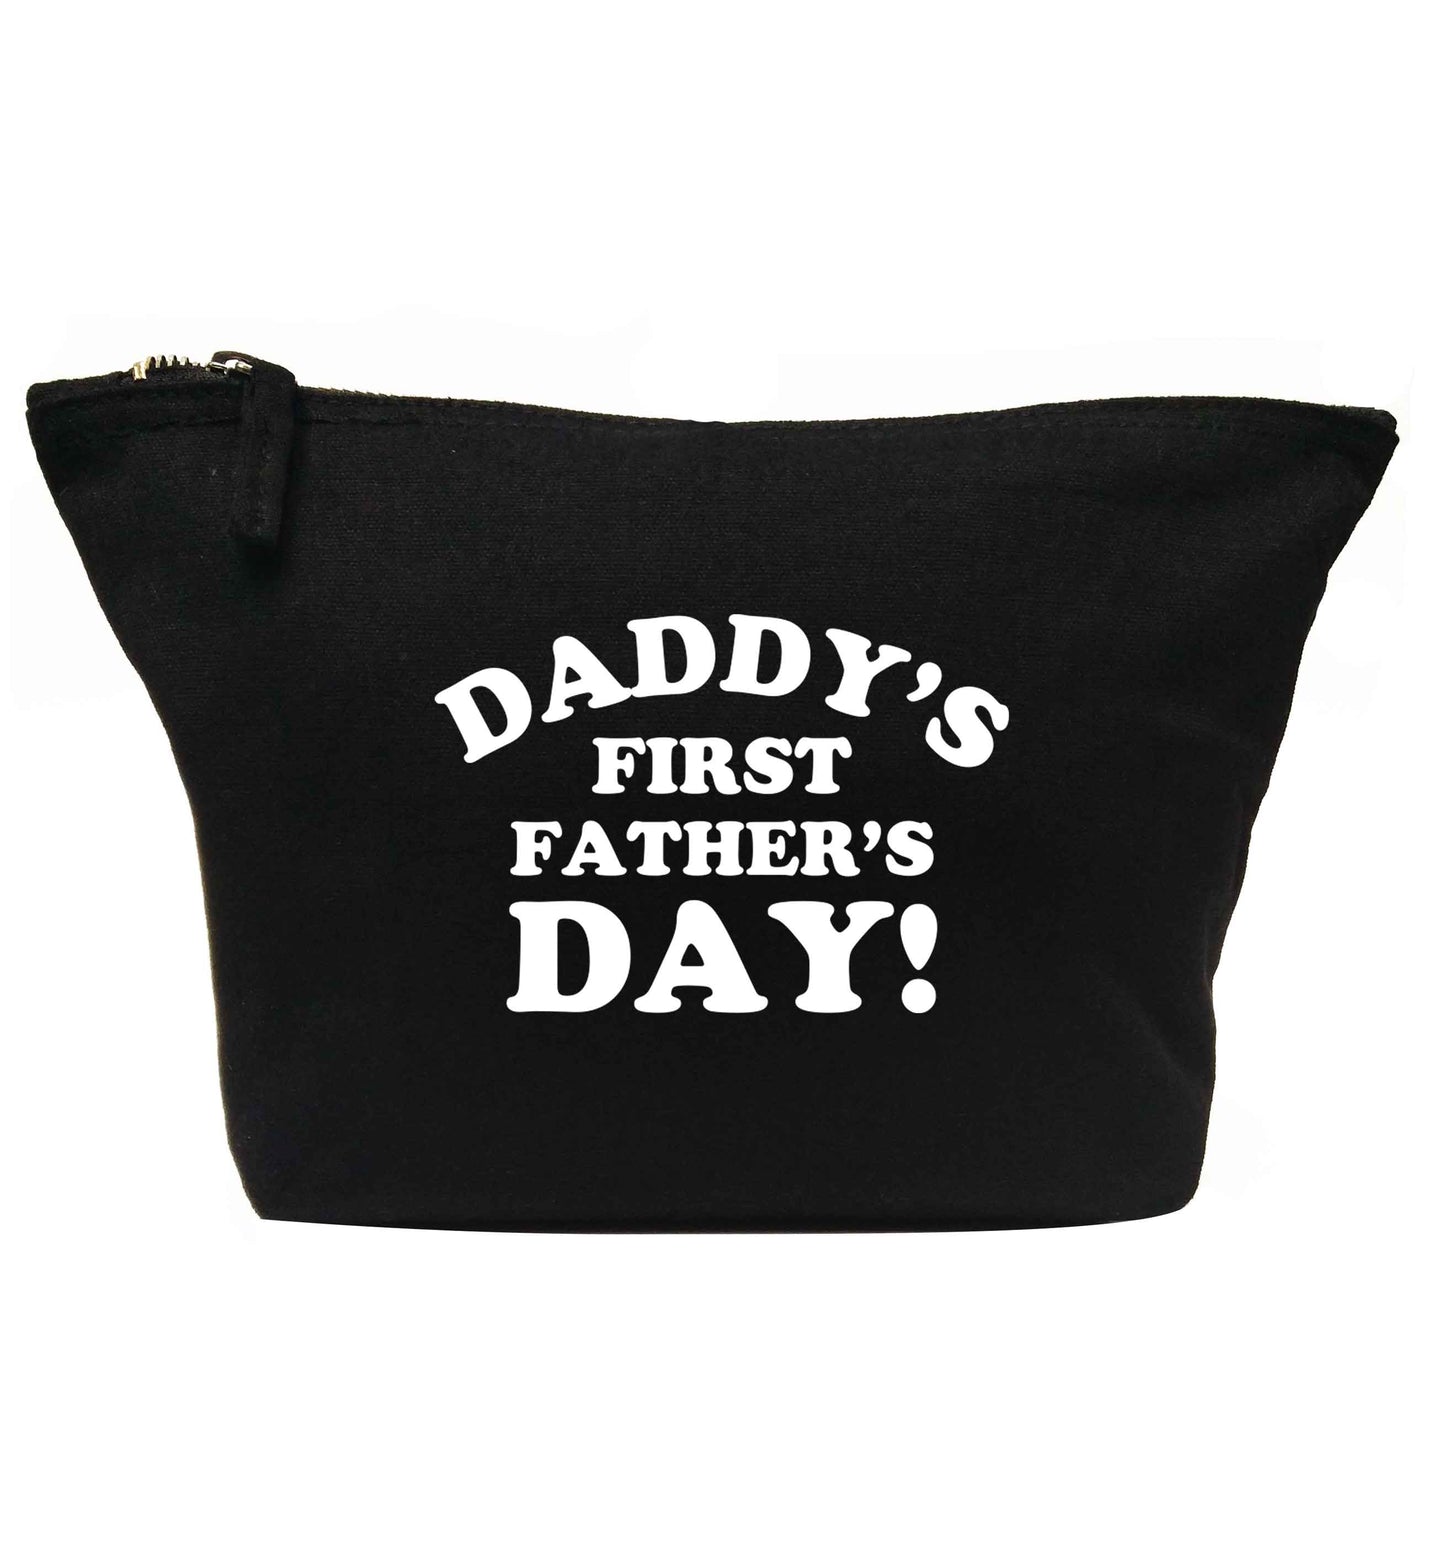 Daddy's first father's day | Makeup / wash bag